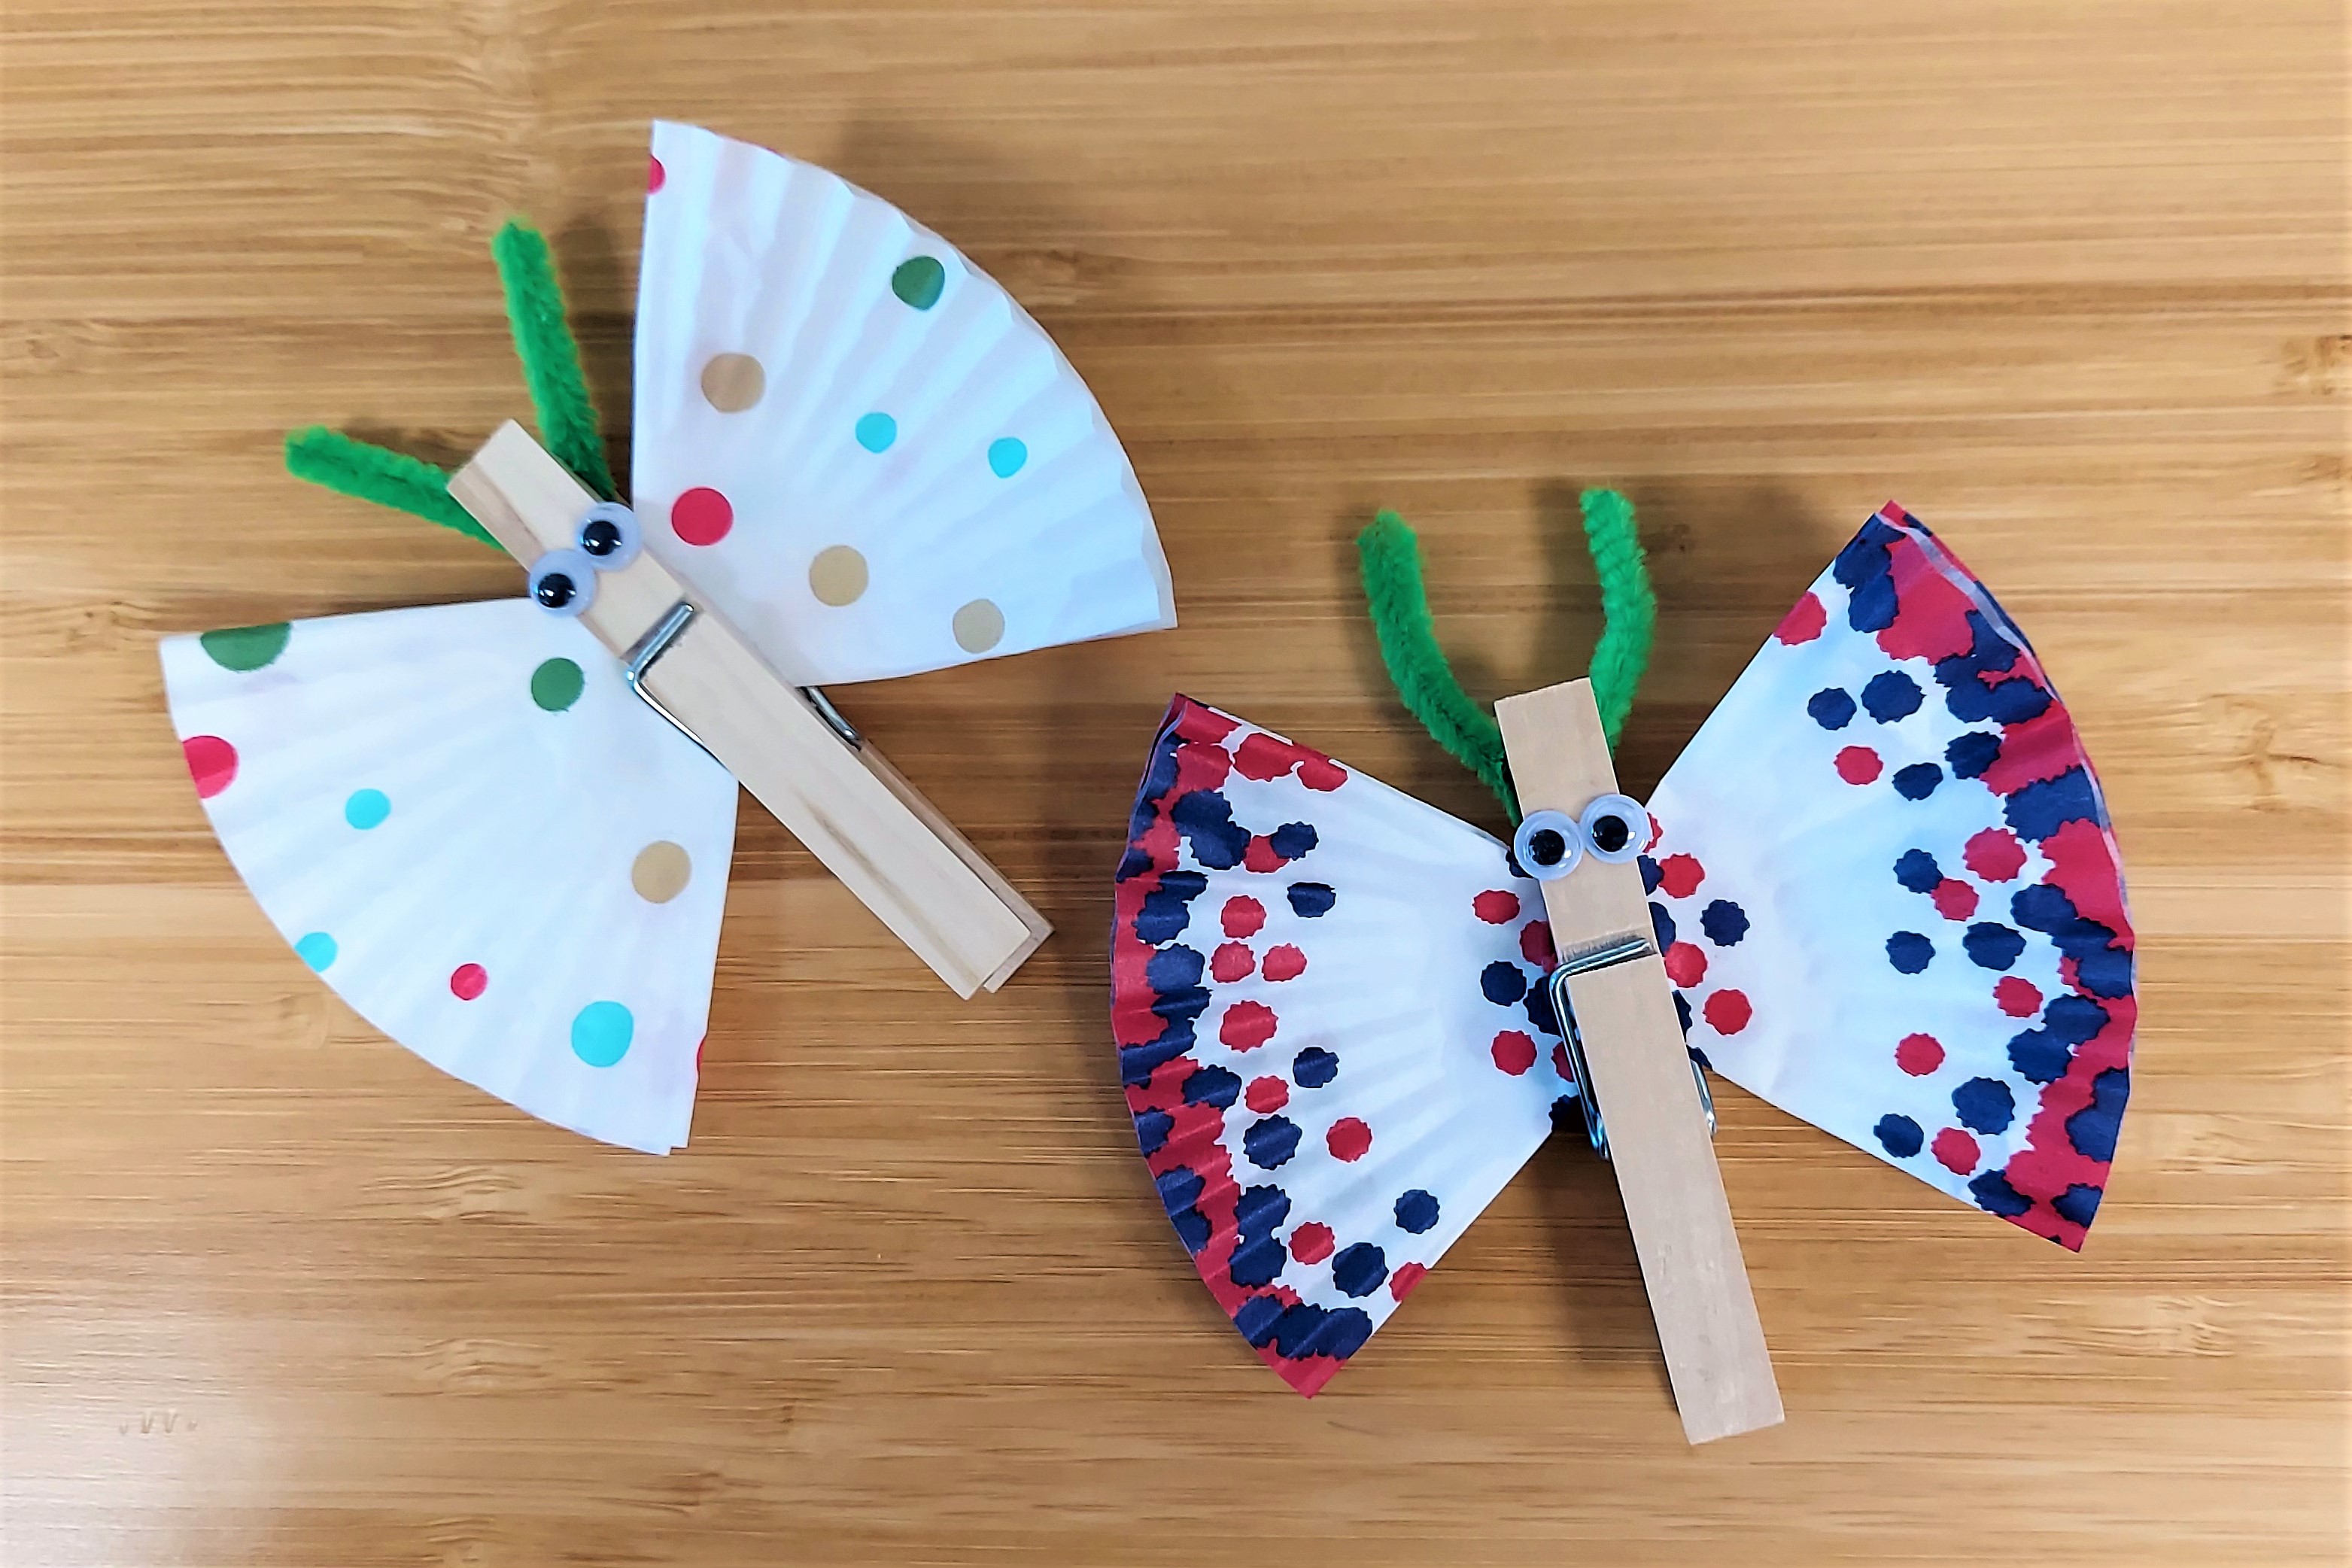 Image of two butterflies made from clothespins.